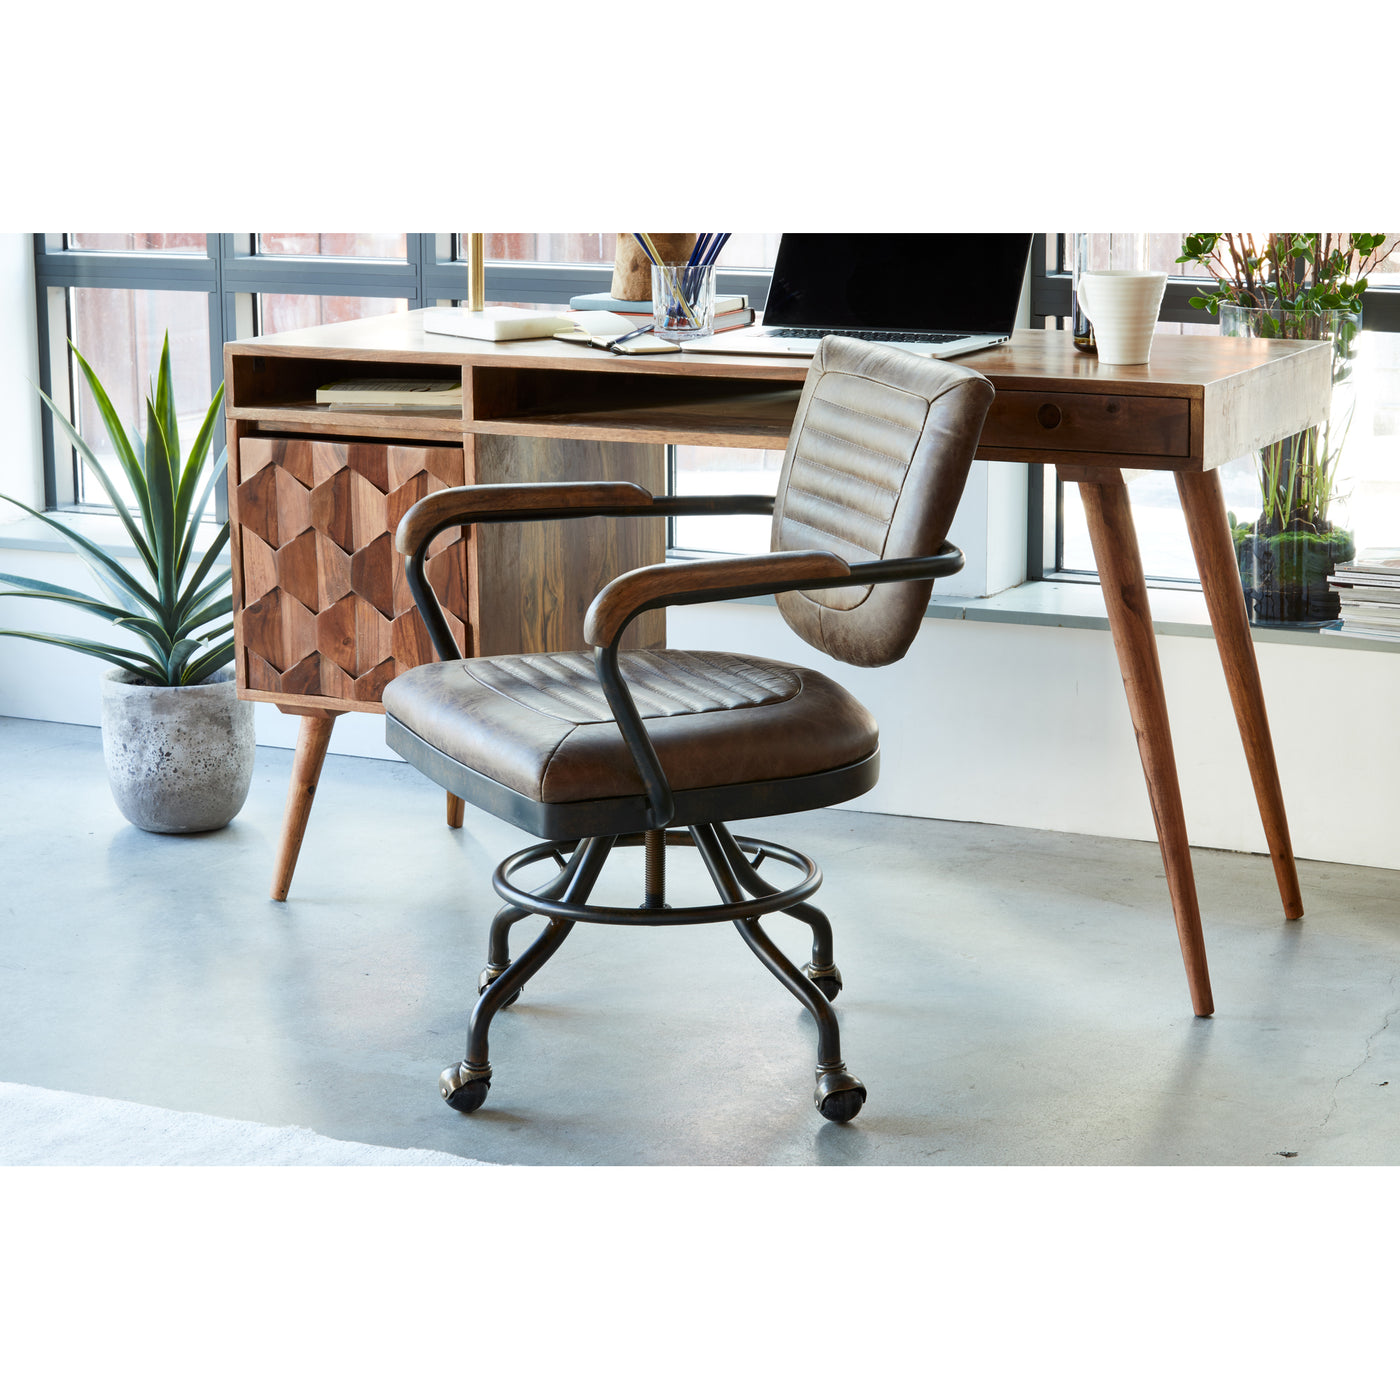 The Foster Desk chair is the ultimate combination of comfort and style for your recording studio, home office, study nook ...